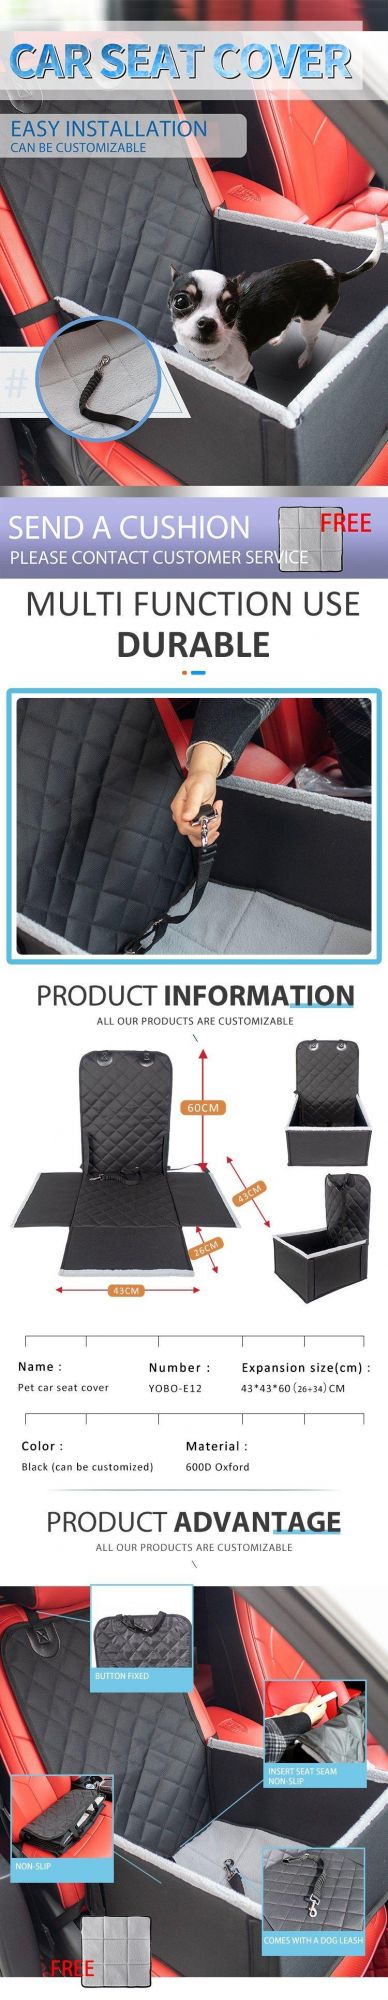 2021 Amazon 600d Oxford Dog Car Seat Cover Anti-Waterproof Mats Car Seat Protector Car Back Seat Organizer with Mesh Window